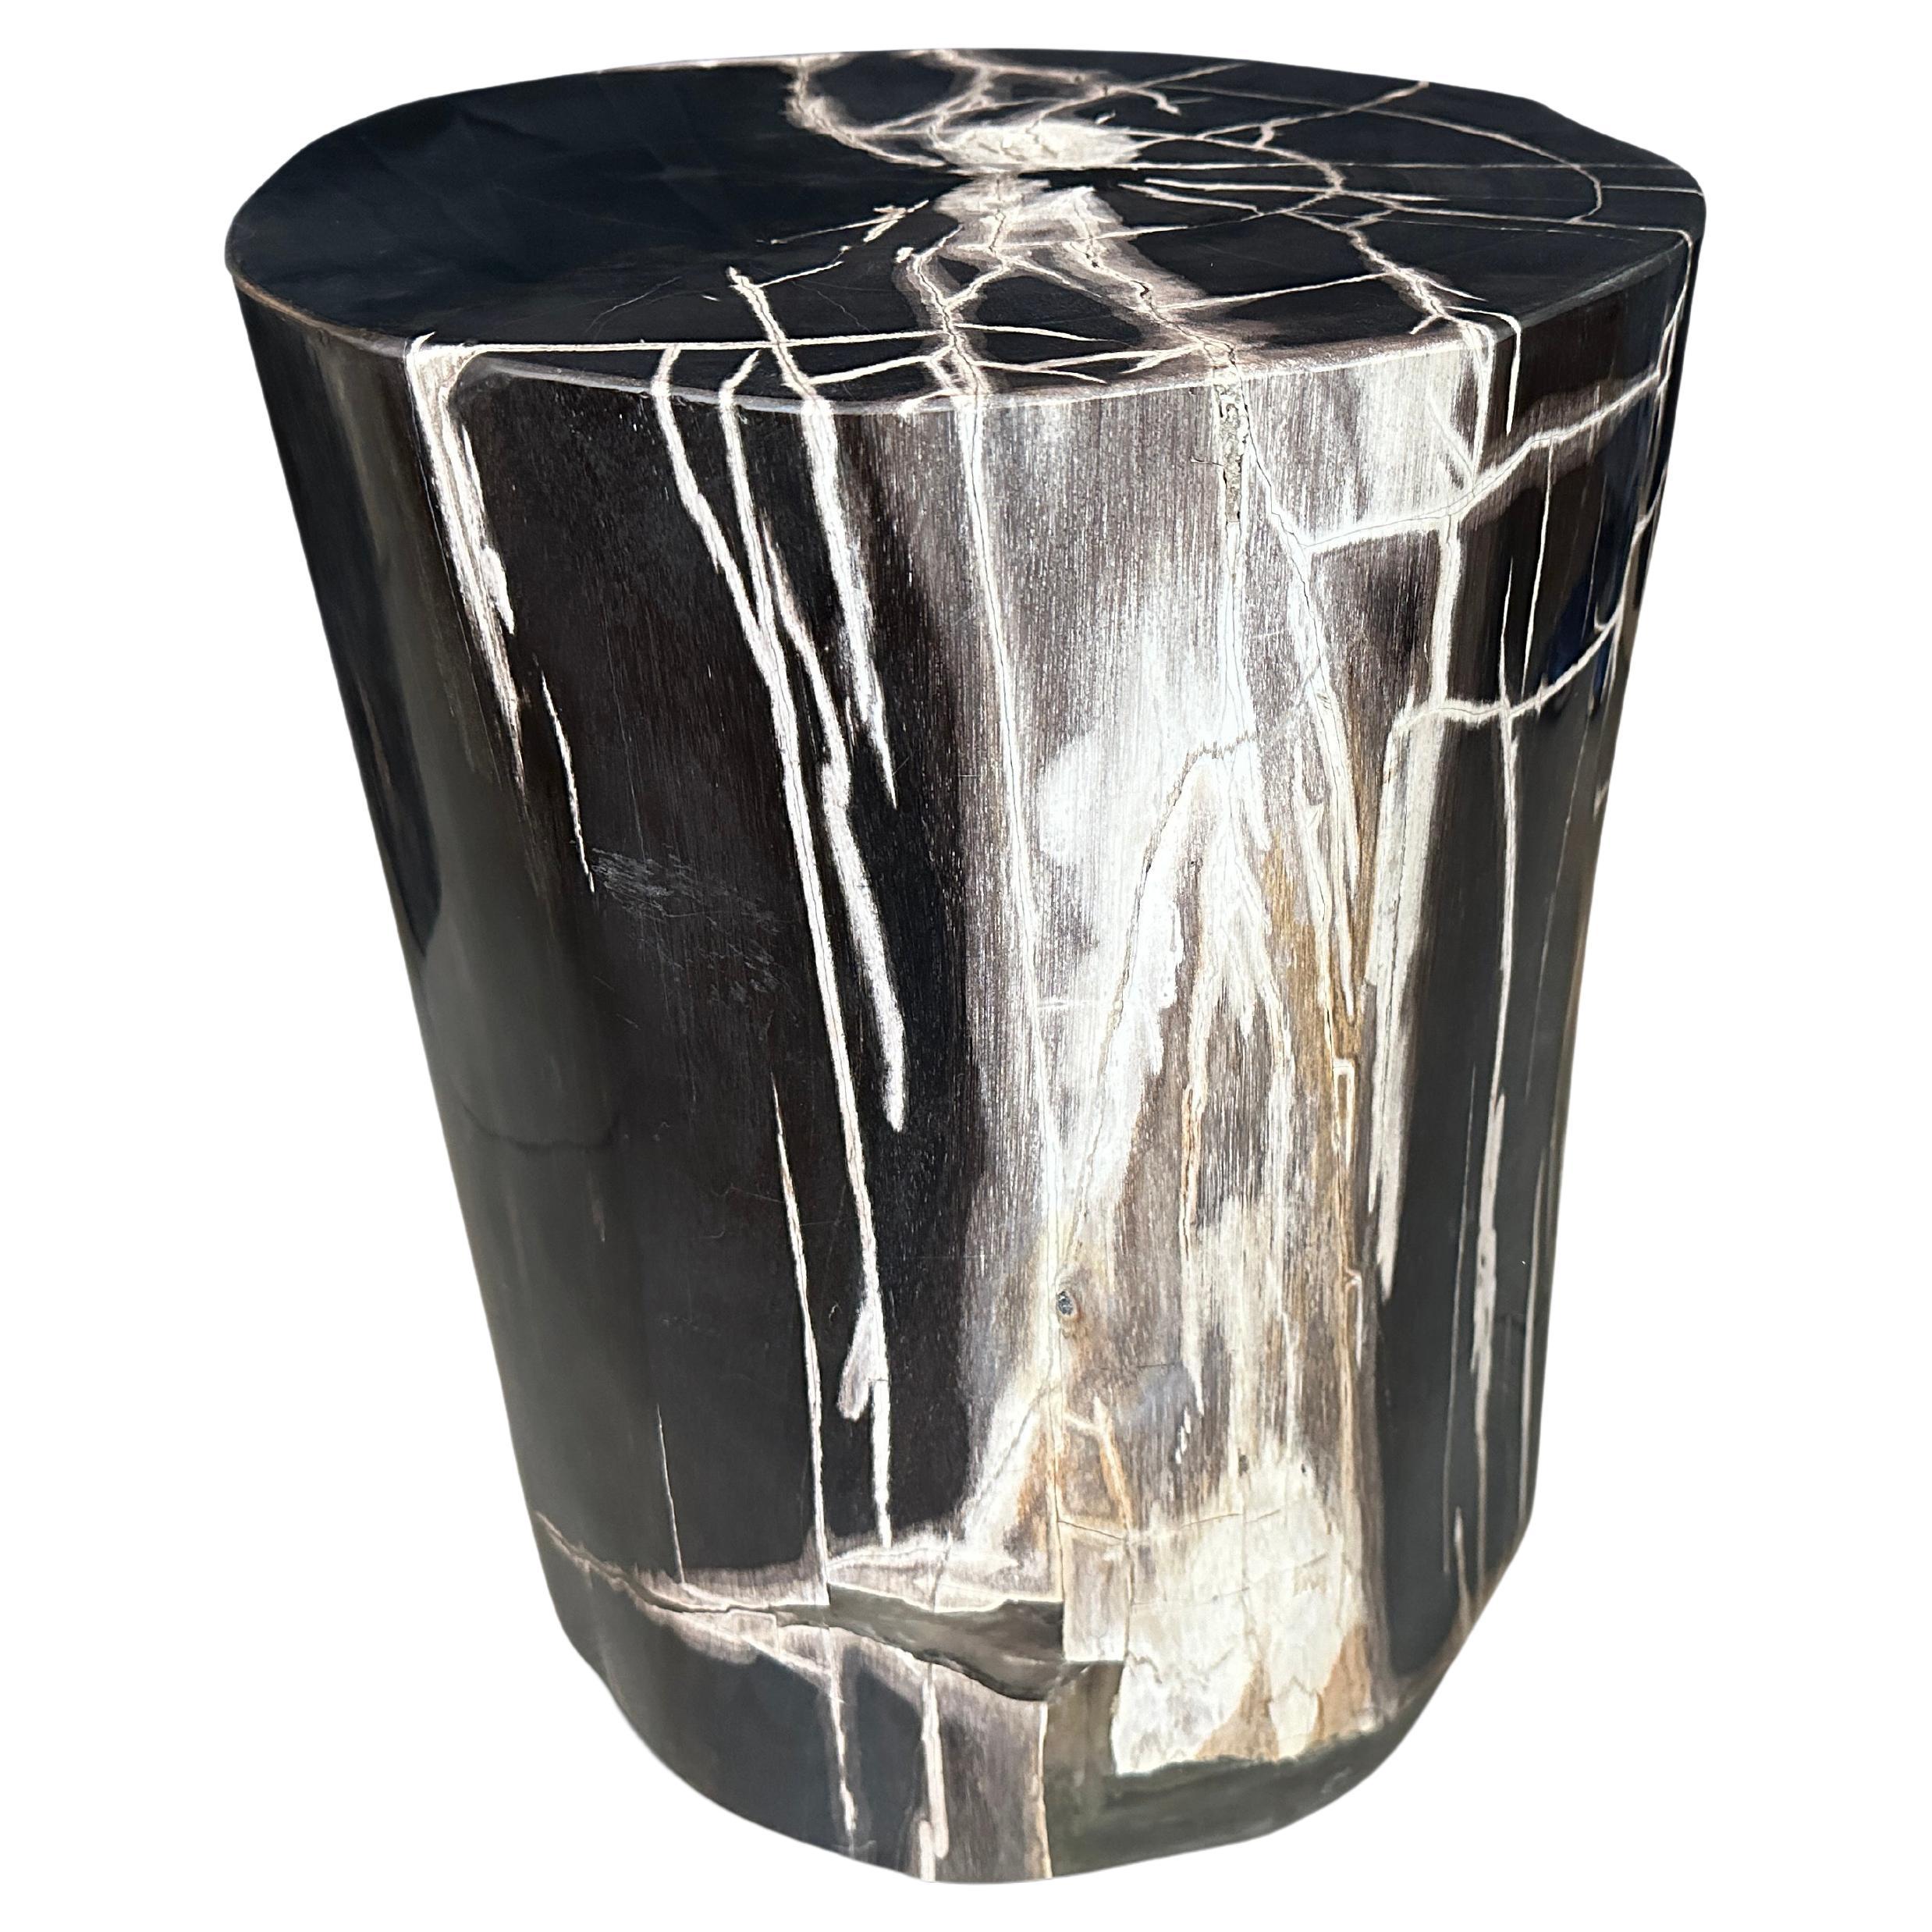 Andrianna Shamaris Exquisite Super Smooth Petrified Wood Side Table For Sale